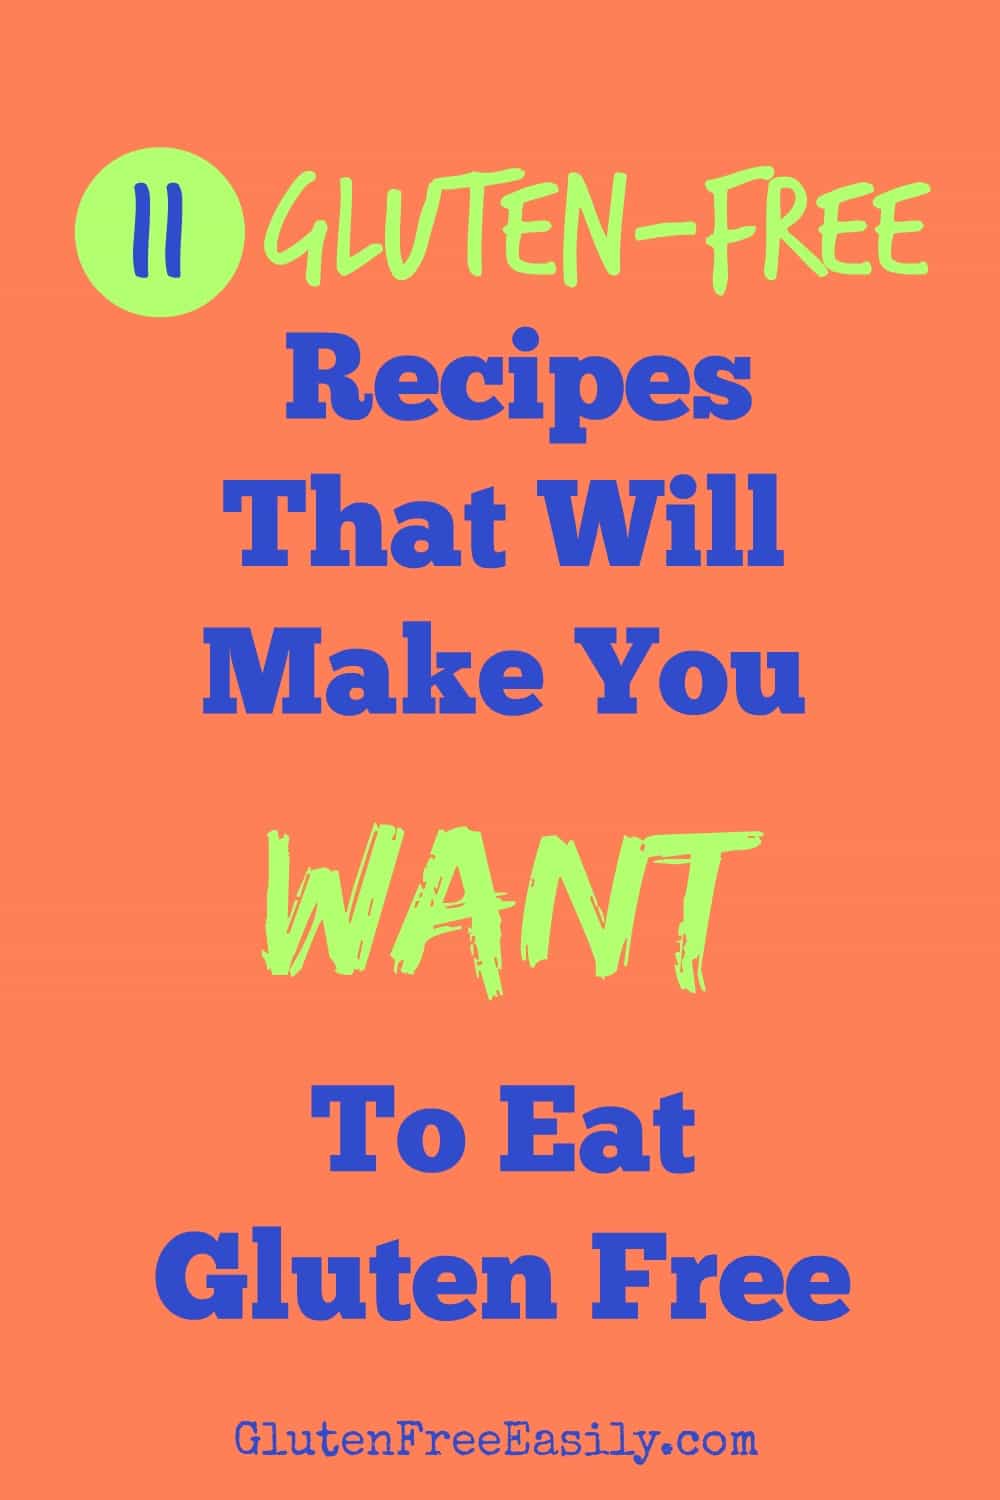 11 Gluten-Free Recipes That Make You Want to Eat Gluten Free! Not only will these recipes make YOU want to eat gluten free, but they will make your friends & family want to eat gluten free! From GlutenFreeEasily.com #glutenfree